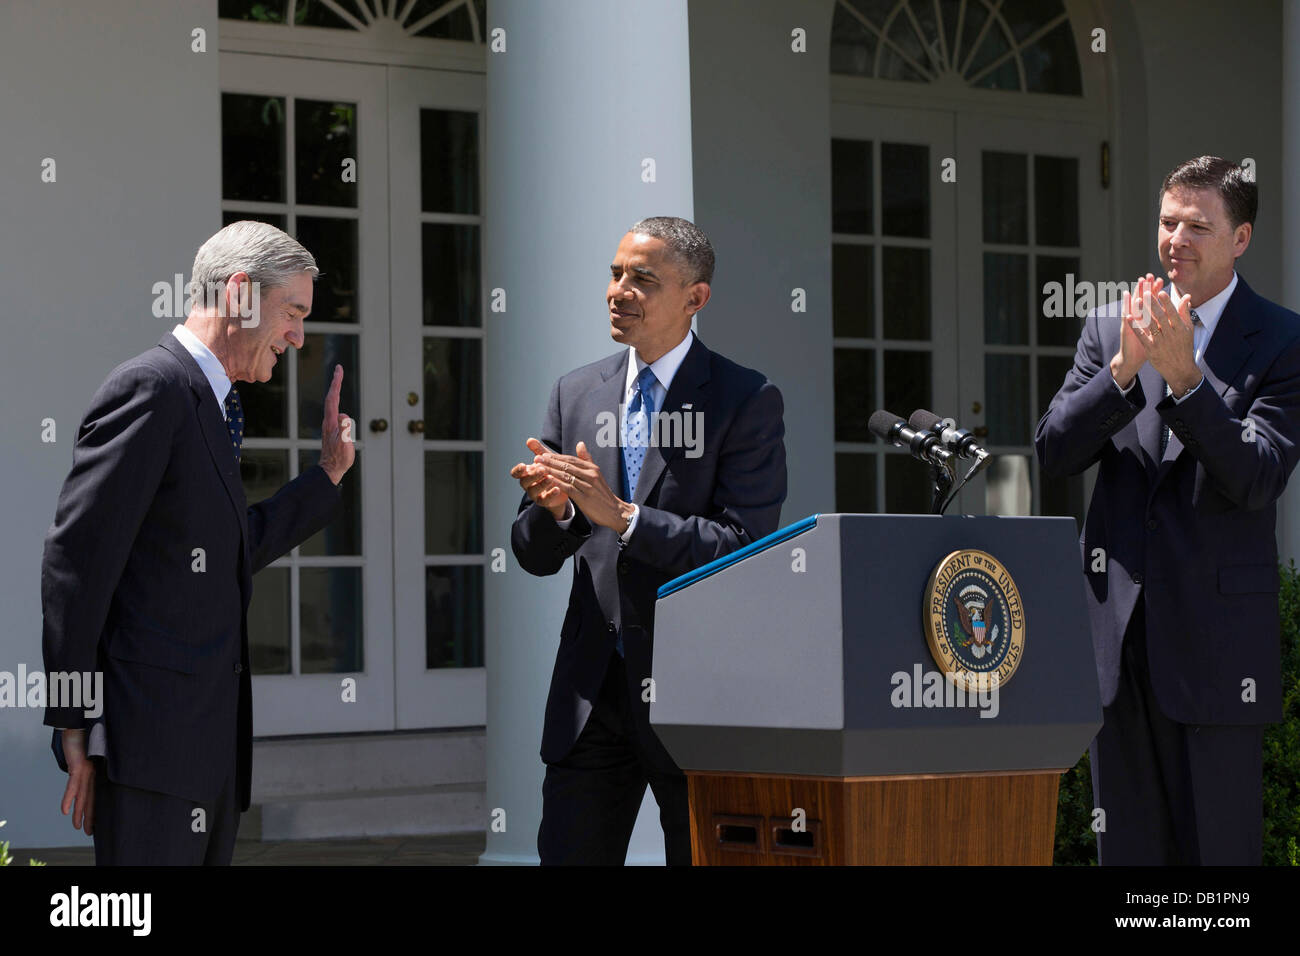 US FBI Director Robert Mueller acknowledges applause during President Barack Obama's remarks in the Rose Garden of the White House June 21, 2013 in Washington, DC. The President announced James Comey, right, as his nominee to succeed Mueller. Stock Photo